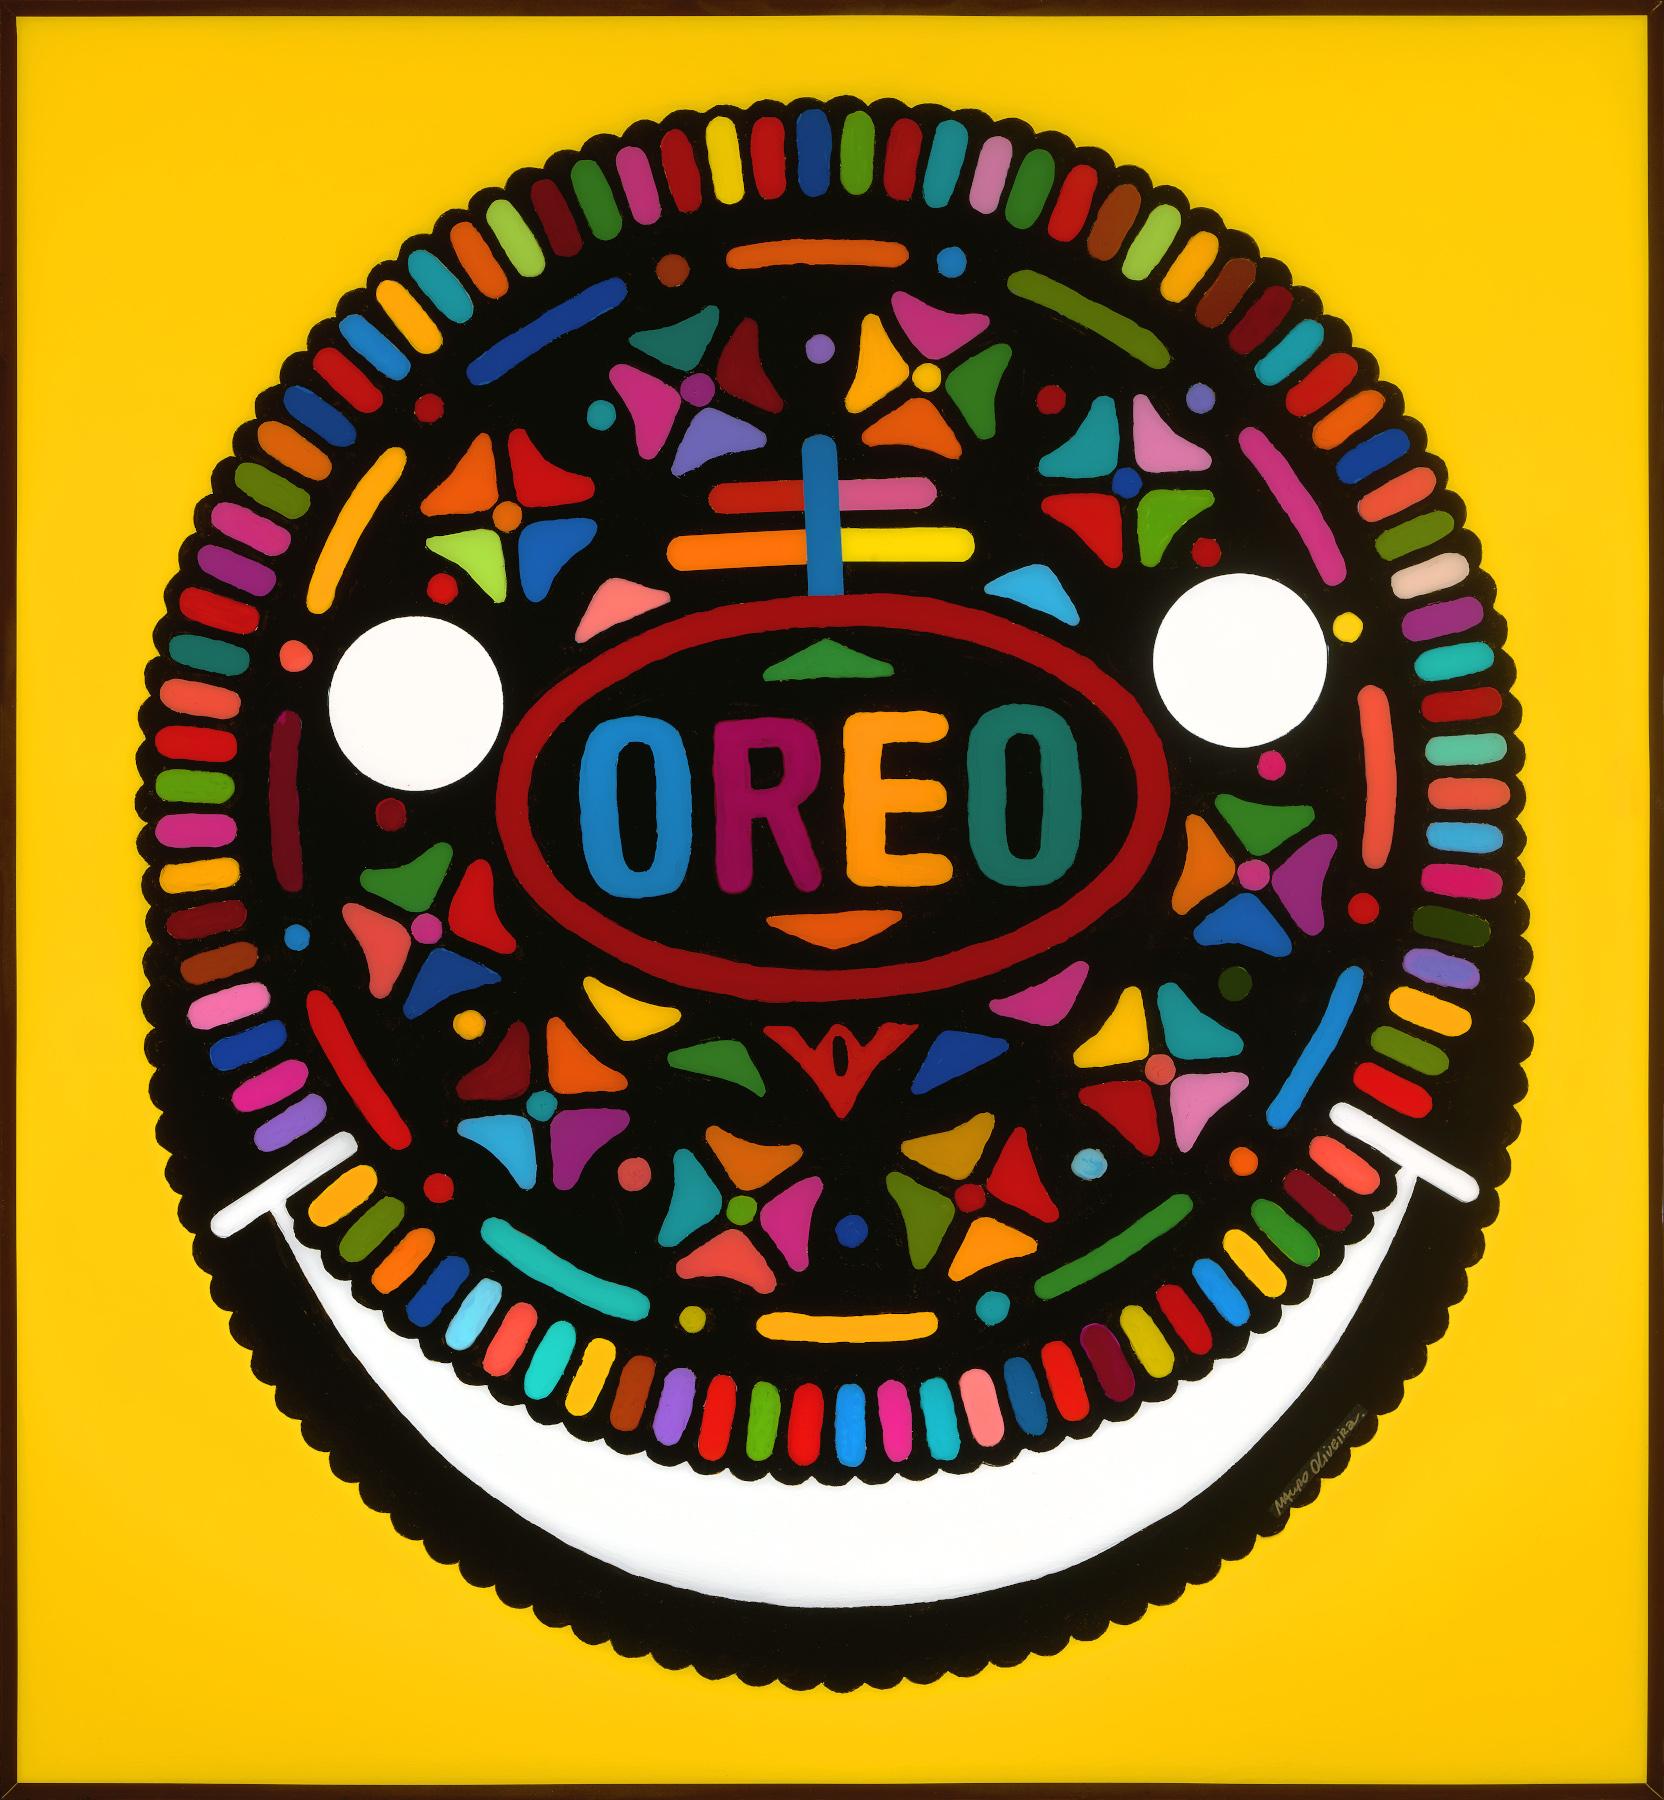 Mauro Oliveira Figurative Print - THE OREO HAPPY HOUR I (Limited Edition of only 30 48"X52" Prints On Canvas)